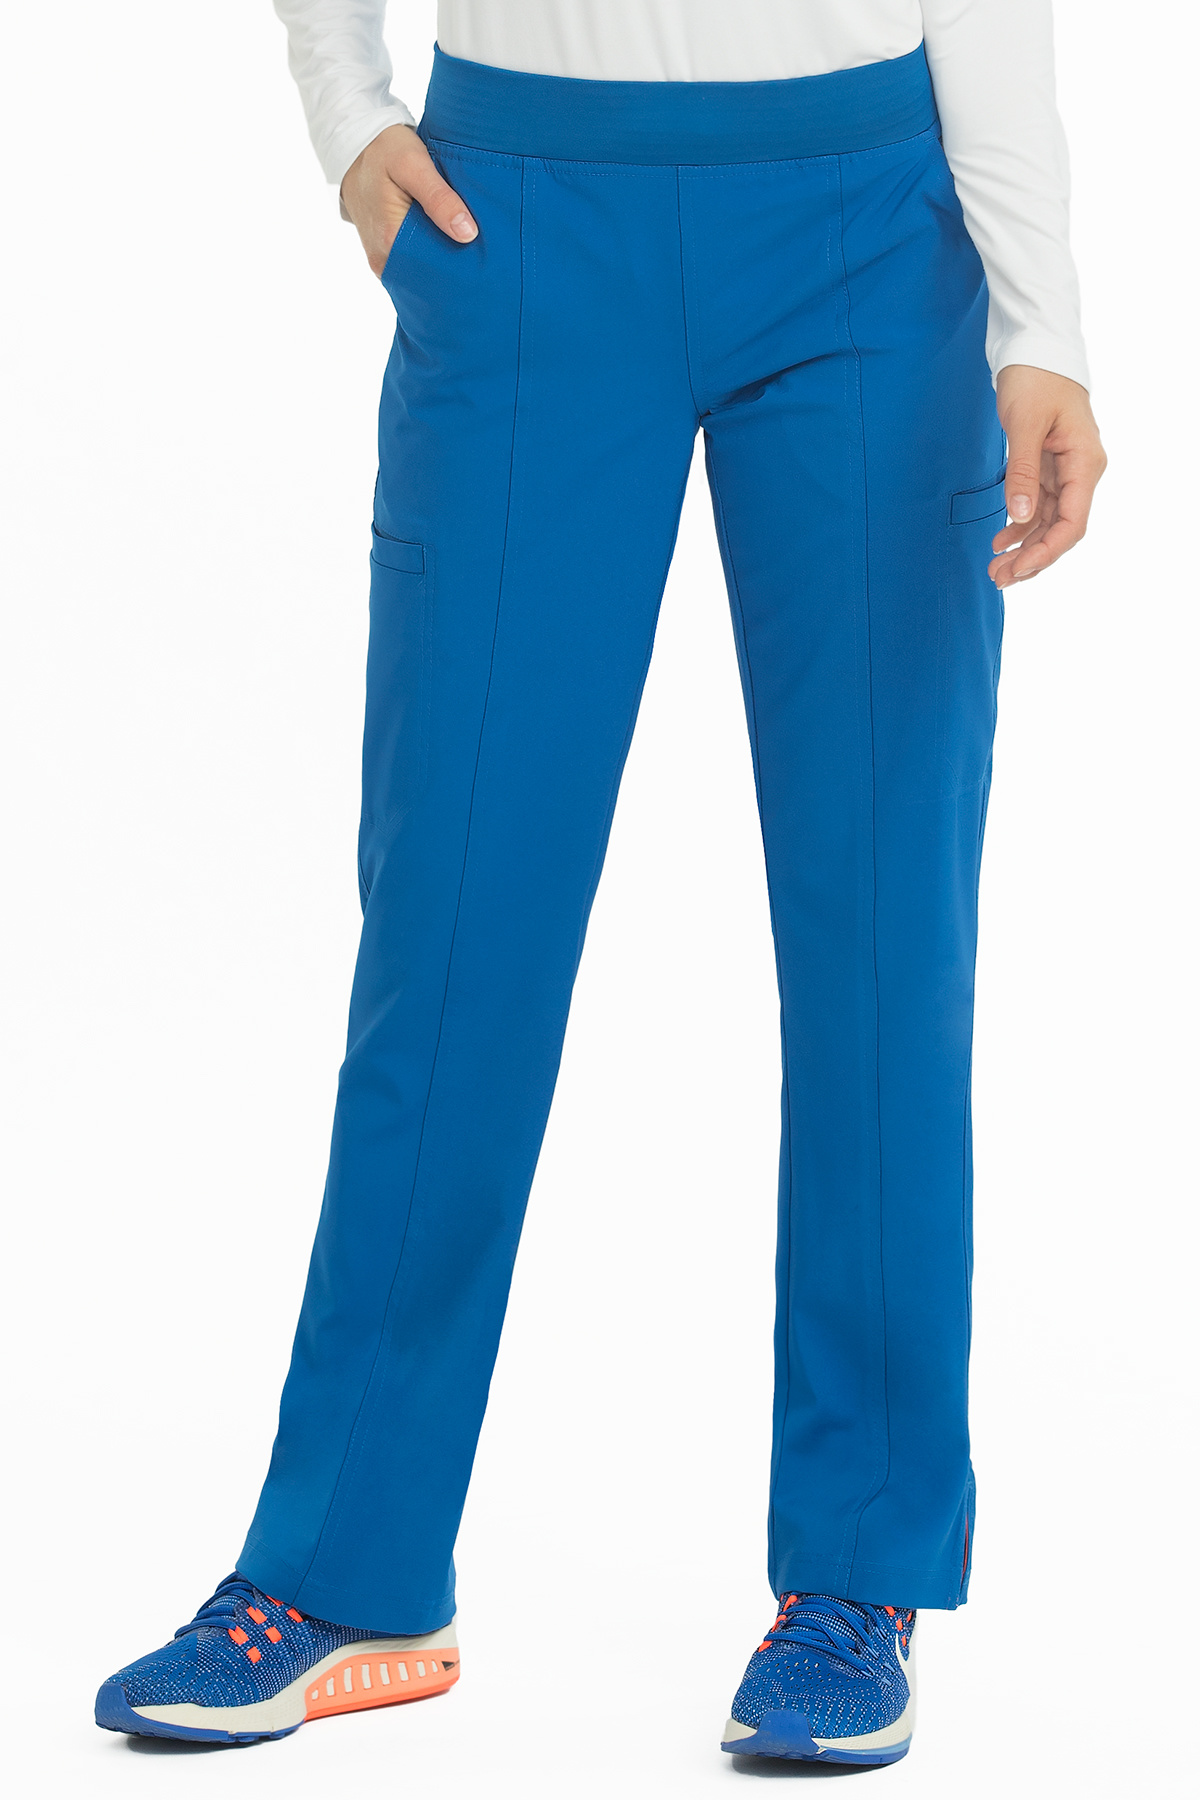 Med Couture Energy Pant 8744 - CSE Mobility and Scrubs